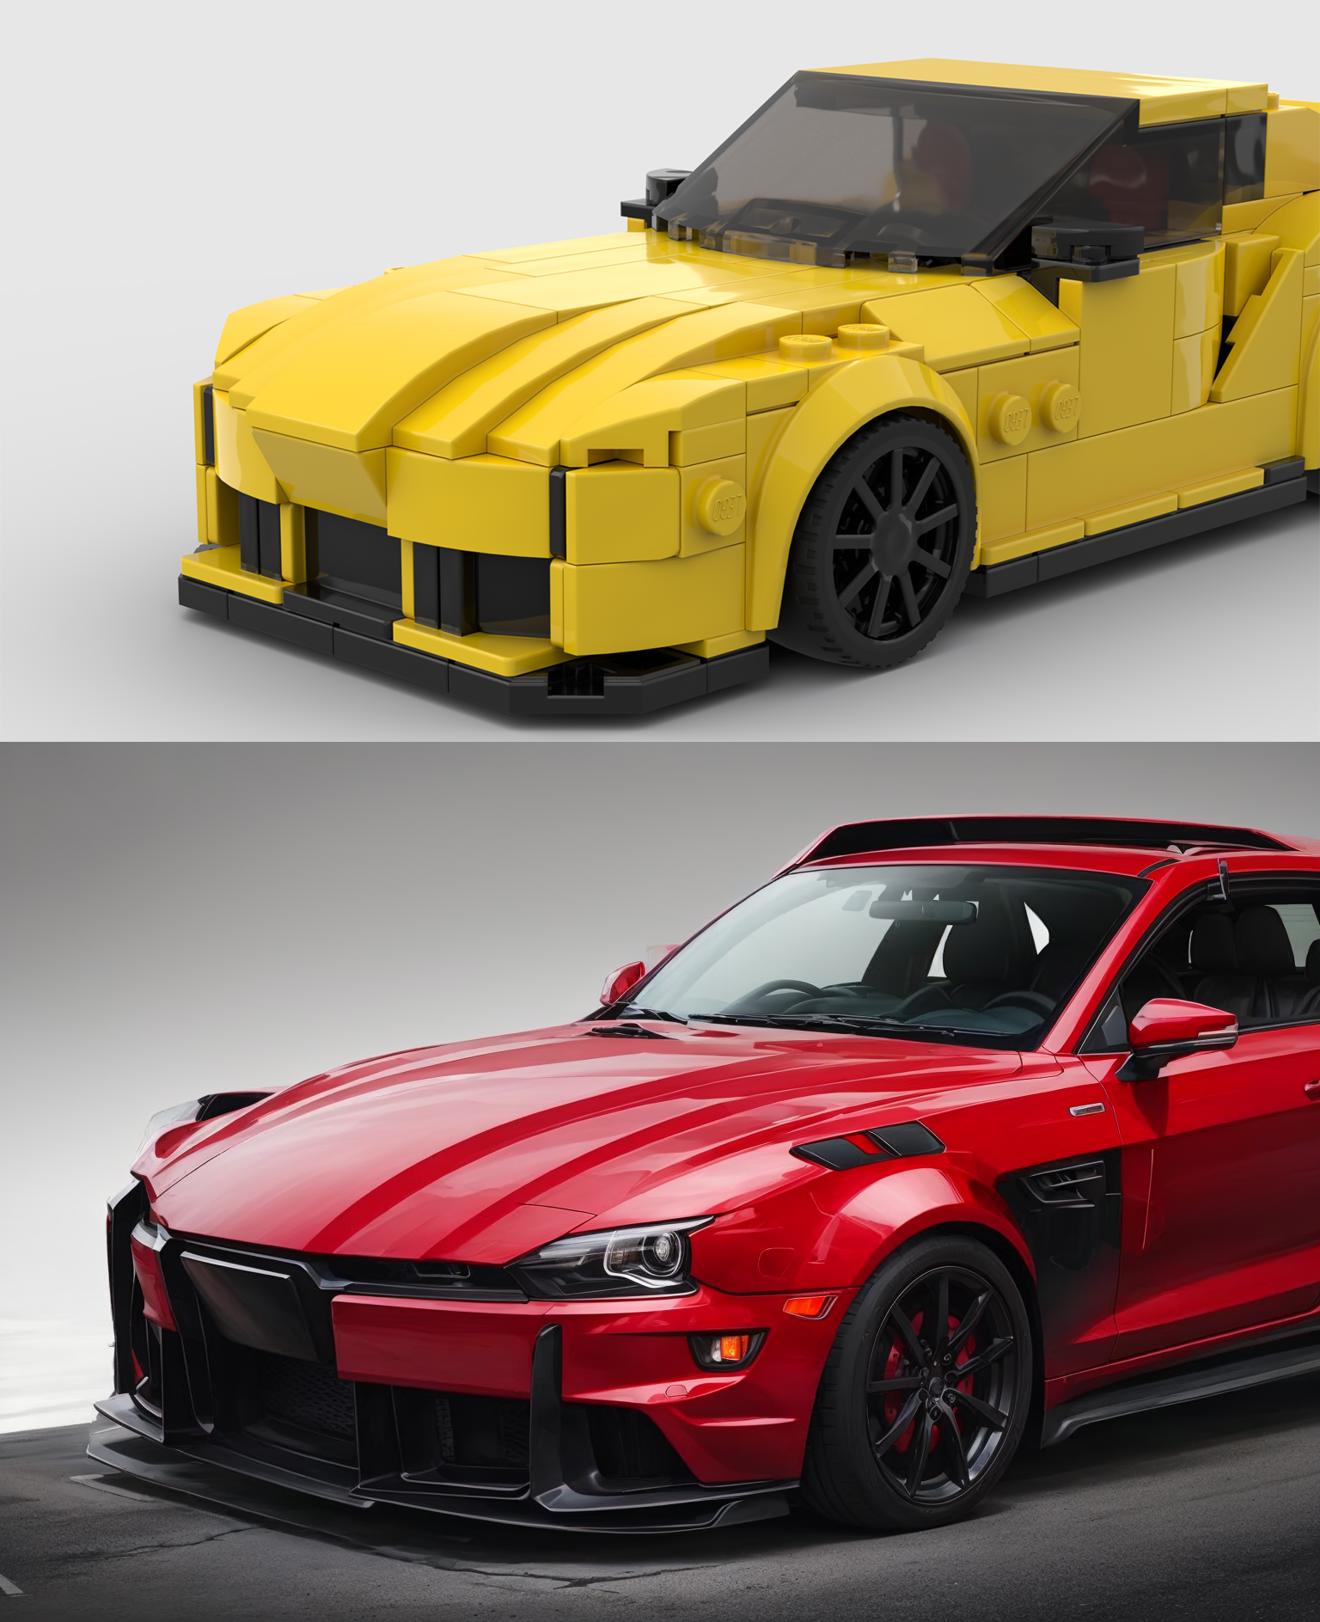 Lego + ControlNet for rendering cars